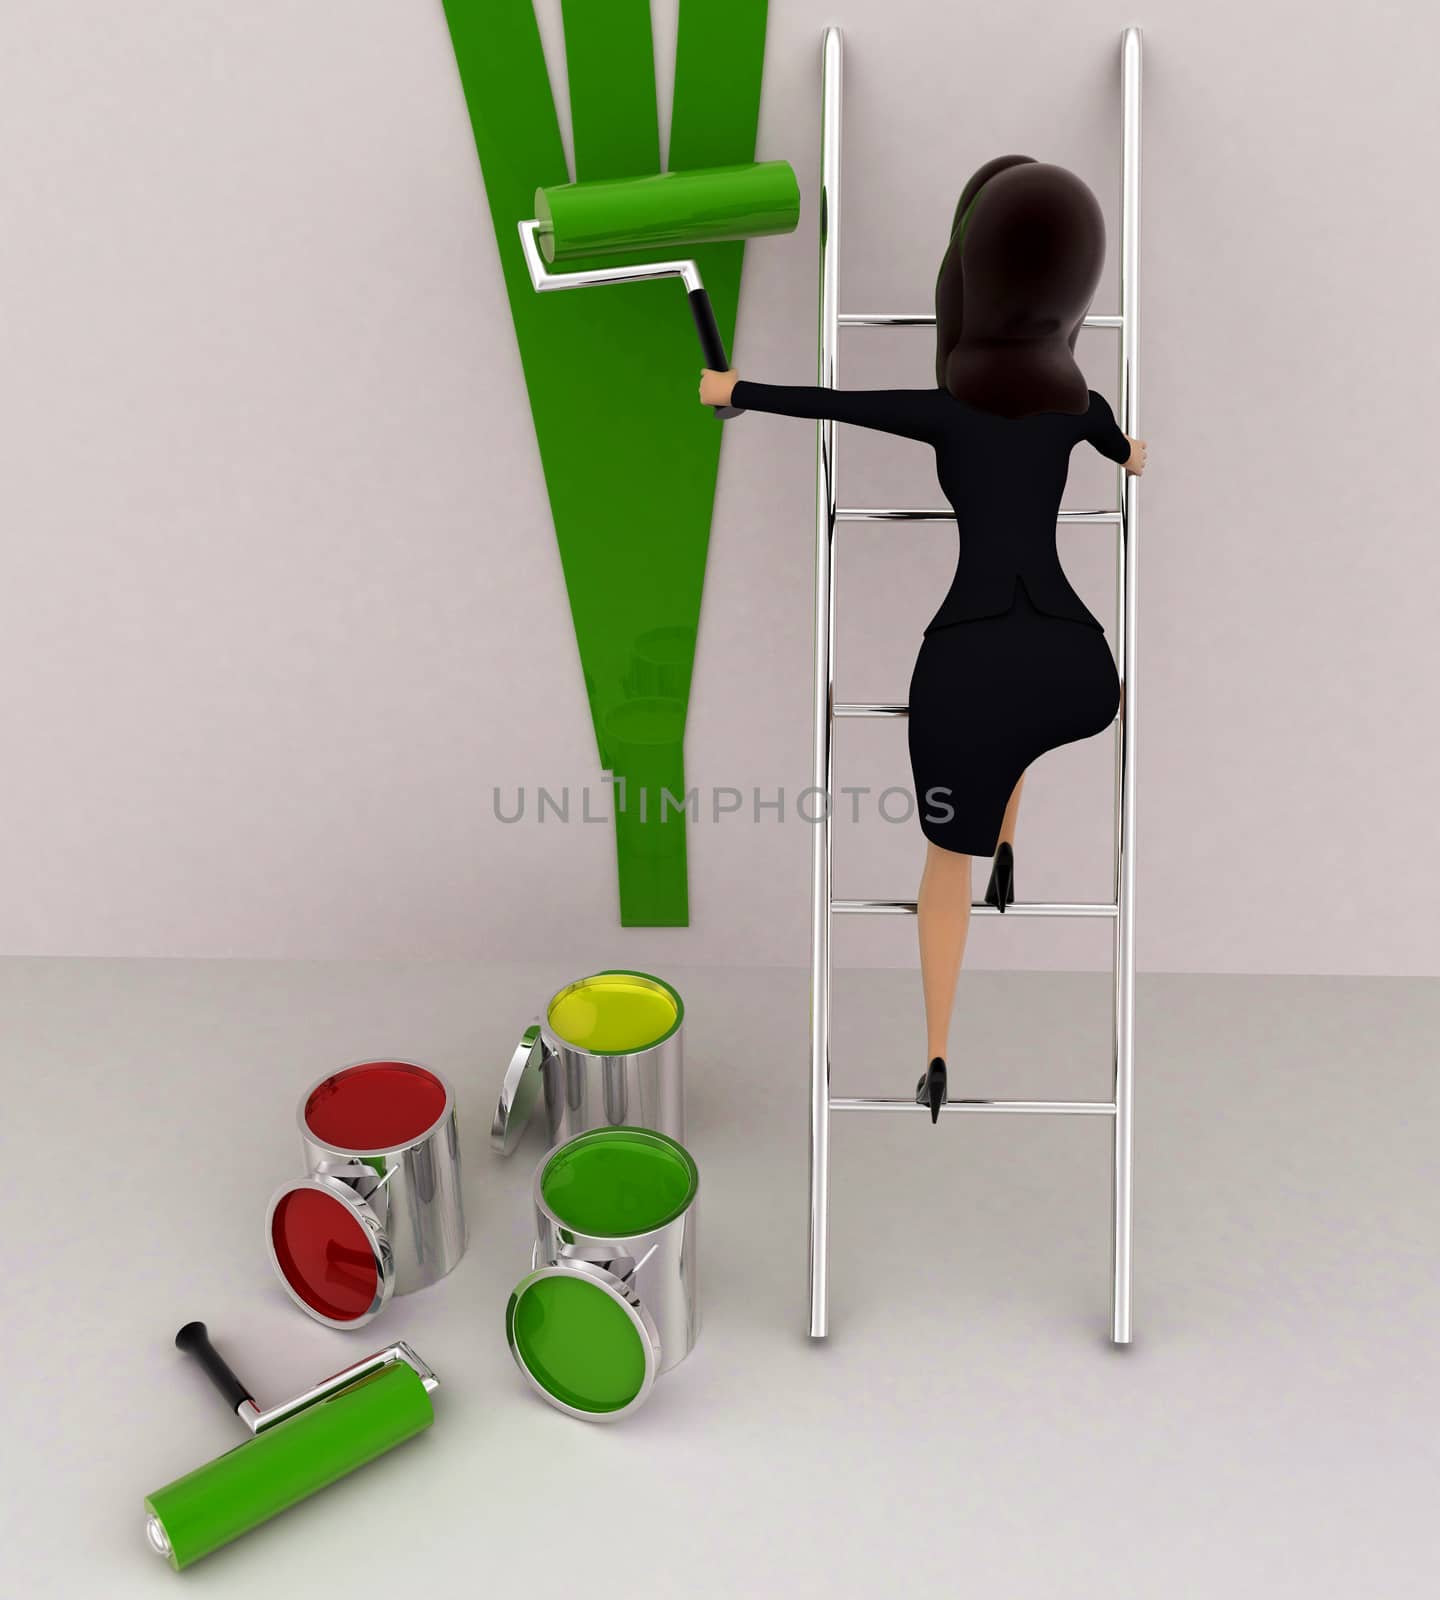 3d woman paint wall green using paint roller concept on white background, front angle view